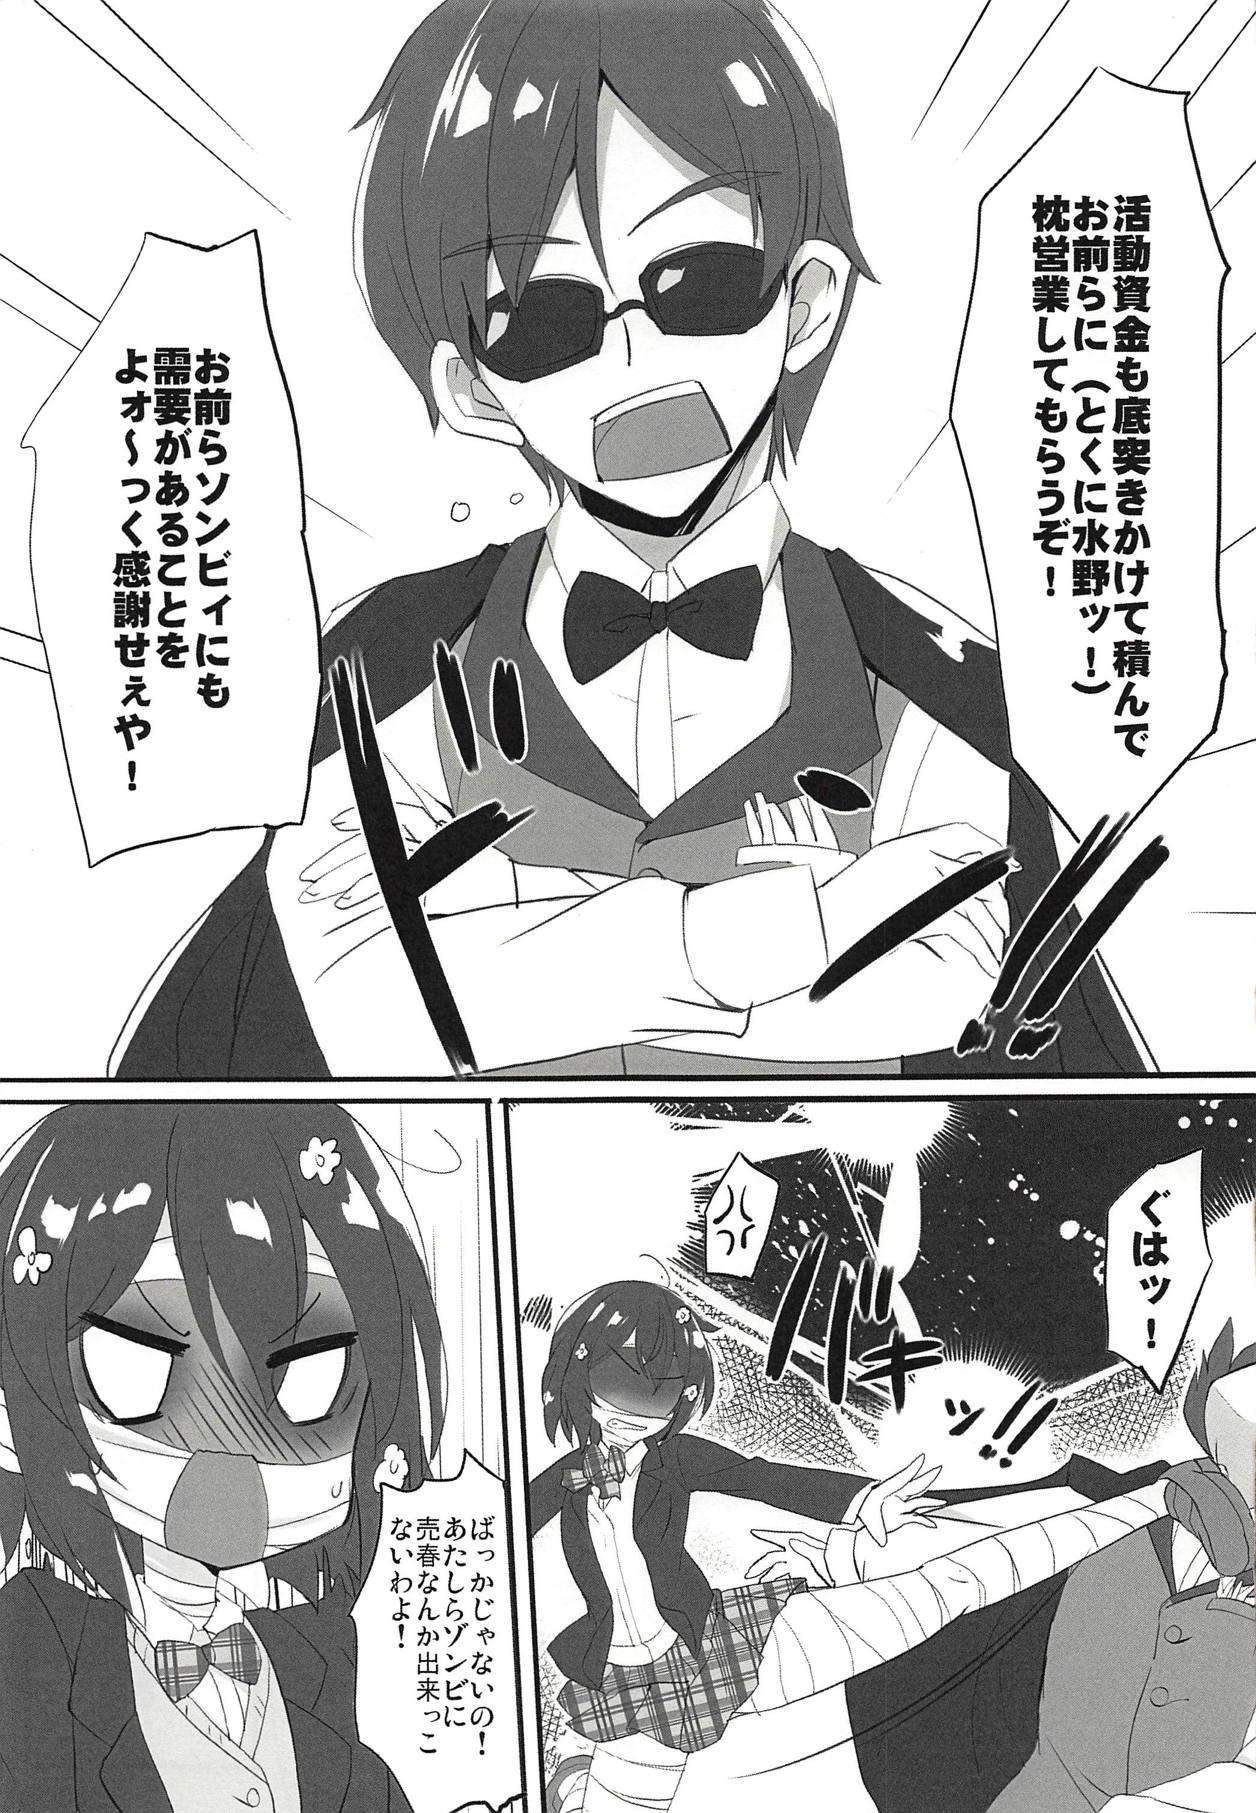 Three Some GOOD and EVIL - Zombie land saga Livecam - Page 4